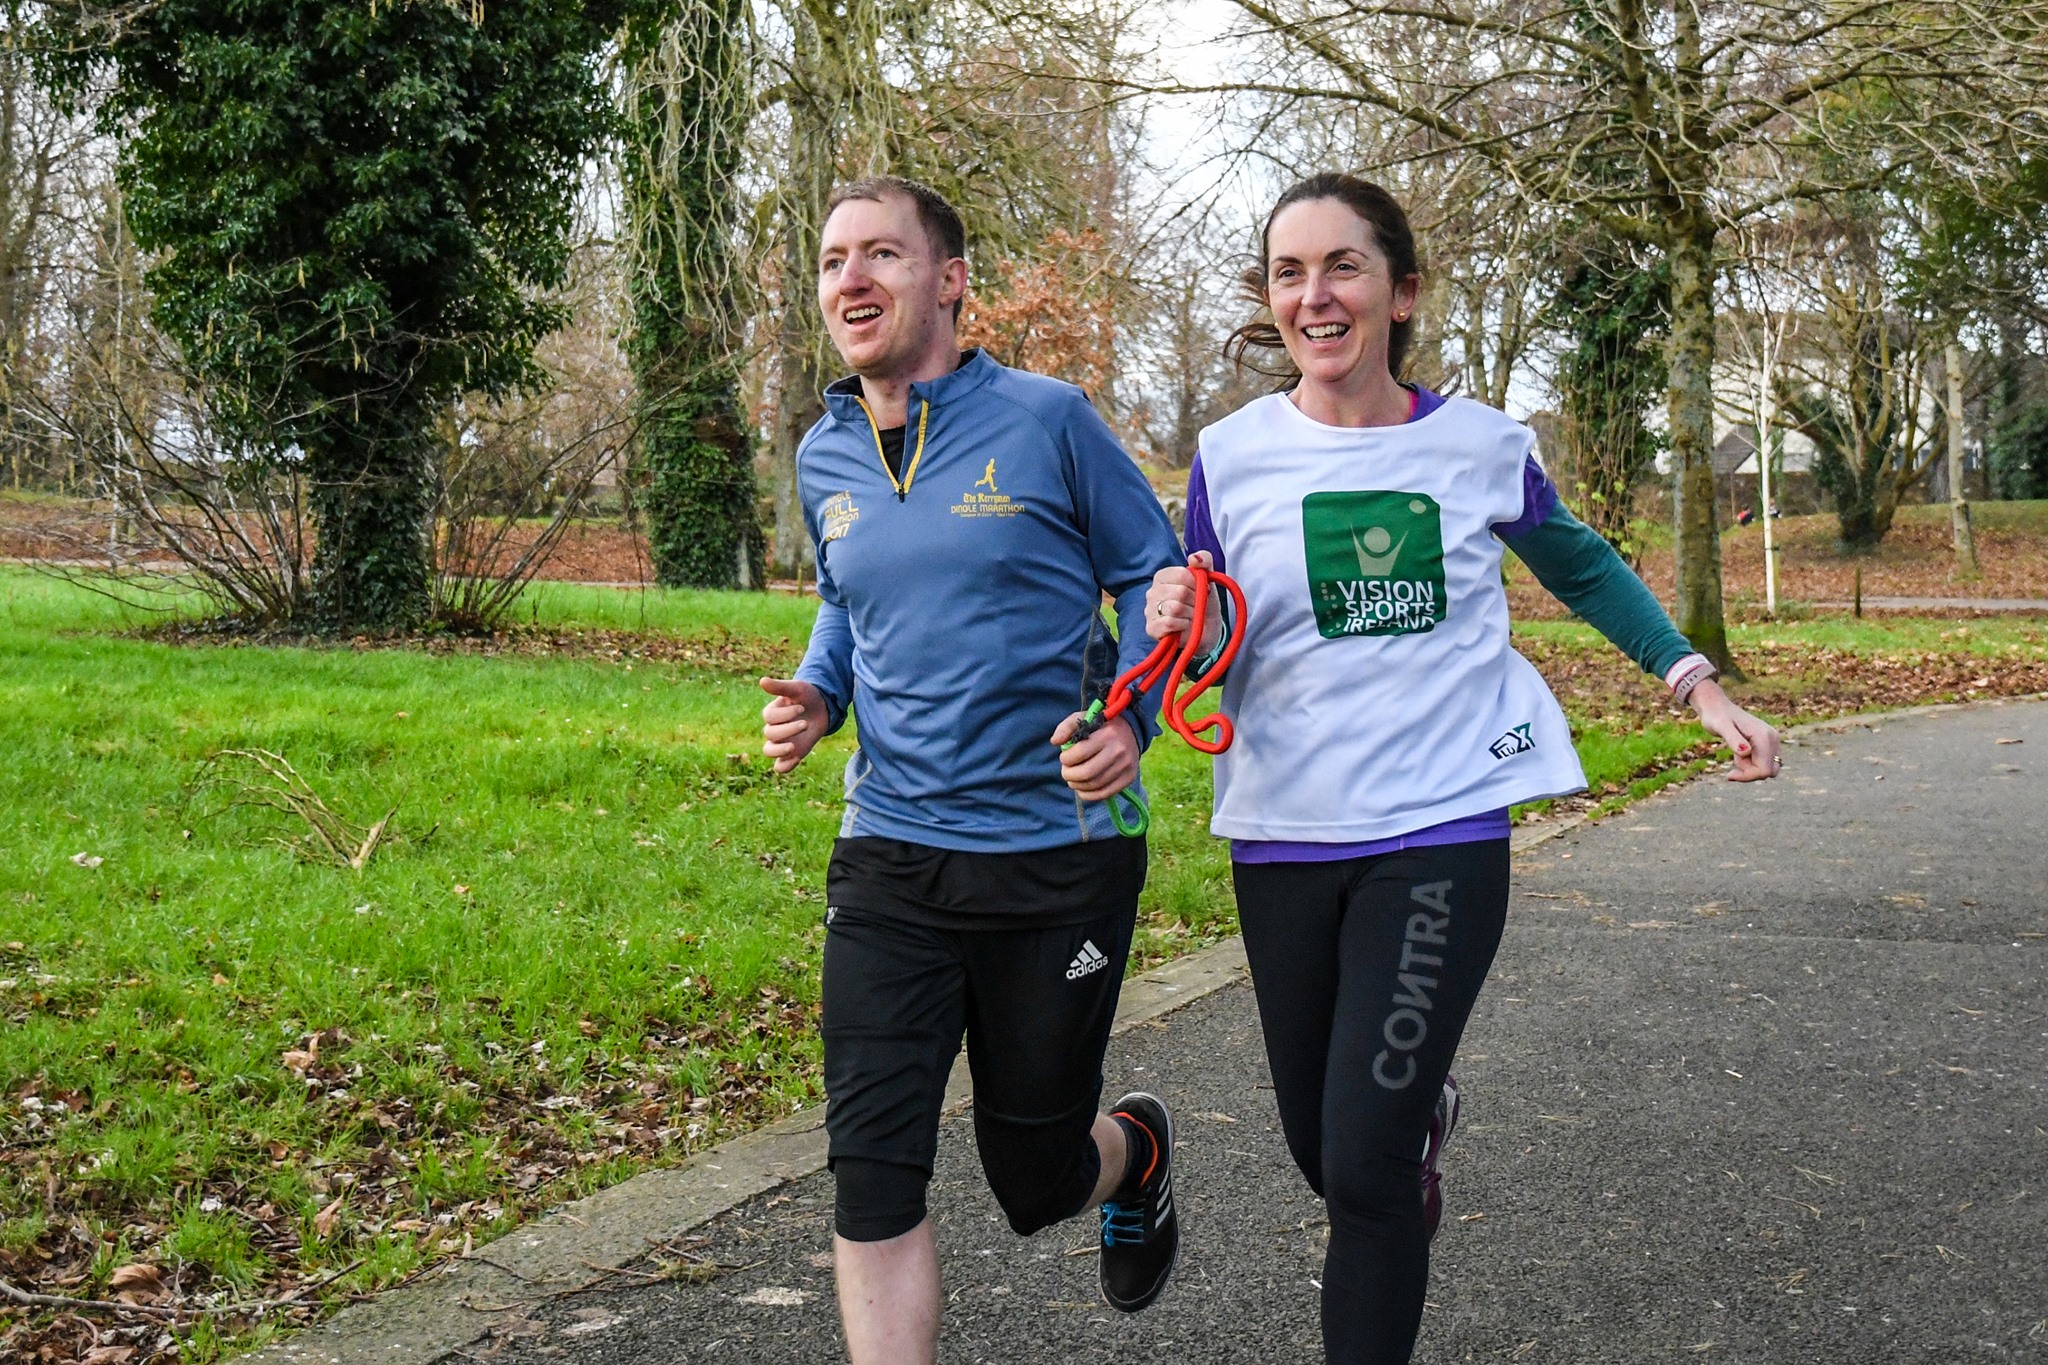 A woman and a man run together through a park area. The man has a red rope tied around his arm which the woman, who is wearing a Vision Sports Ireland t-shirt, is holding.